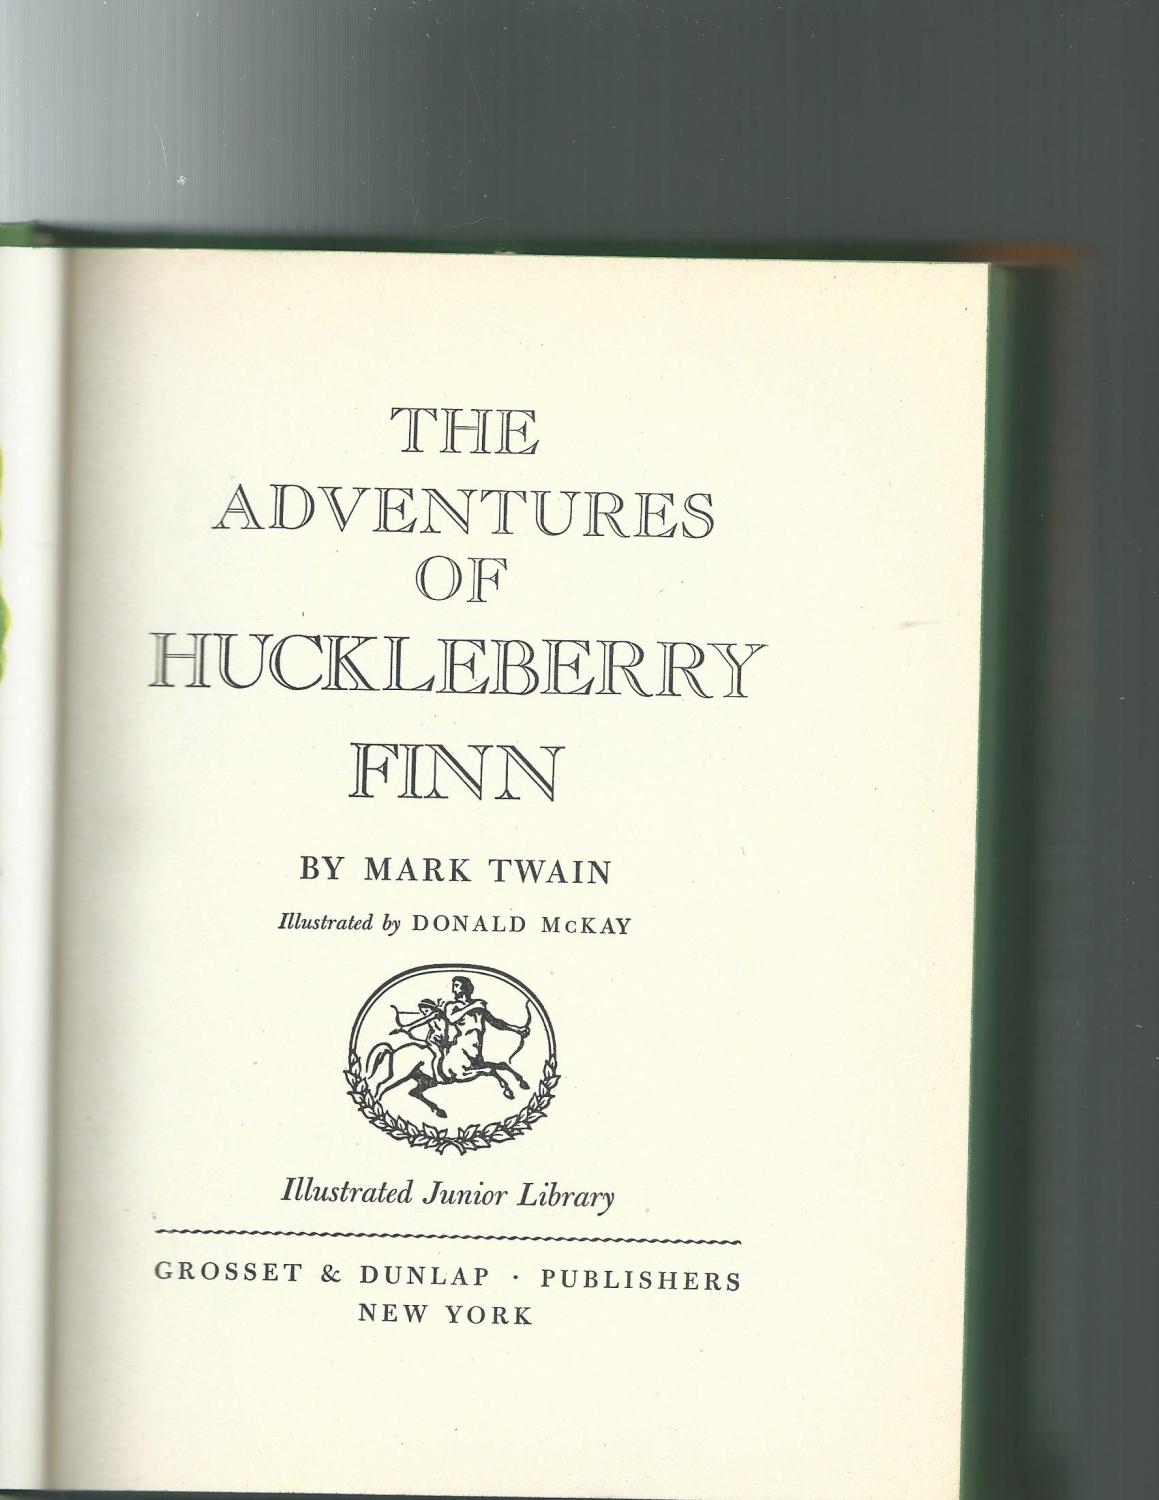 THE ADVENTURES OF HUCKLEBERRY FINN illustrated junior library edition ...